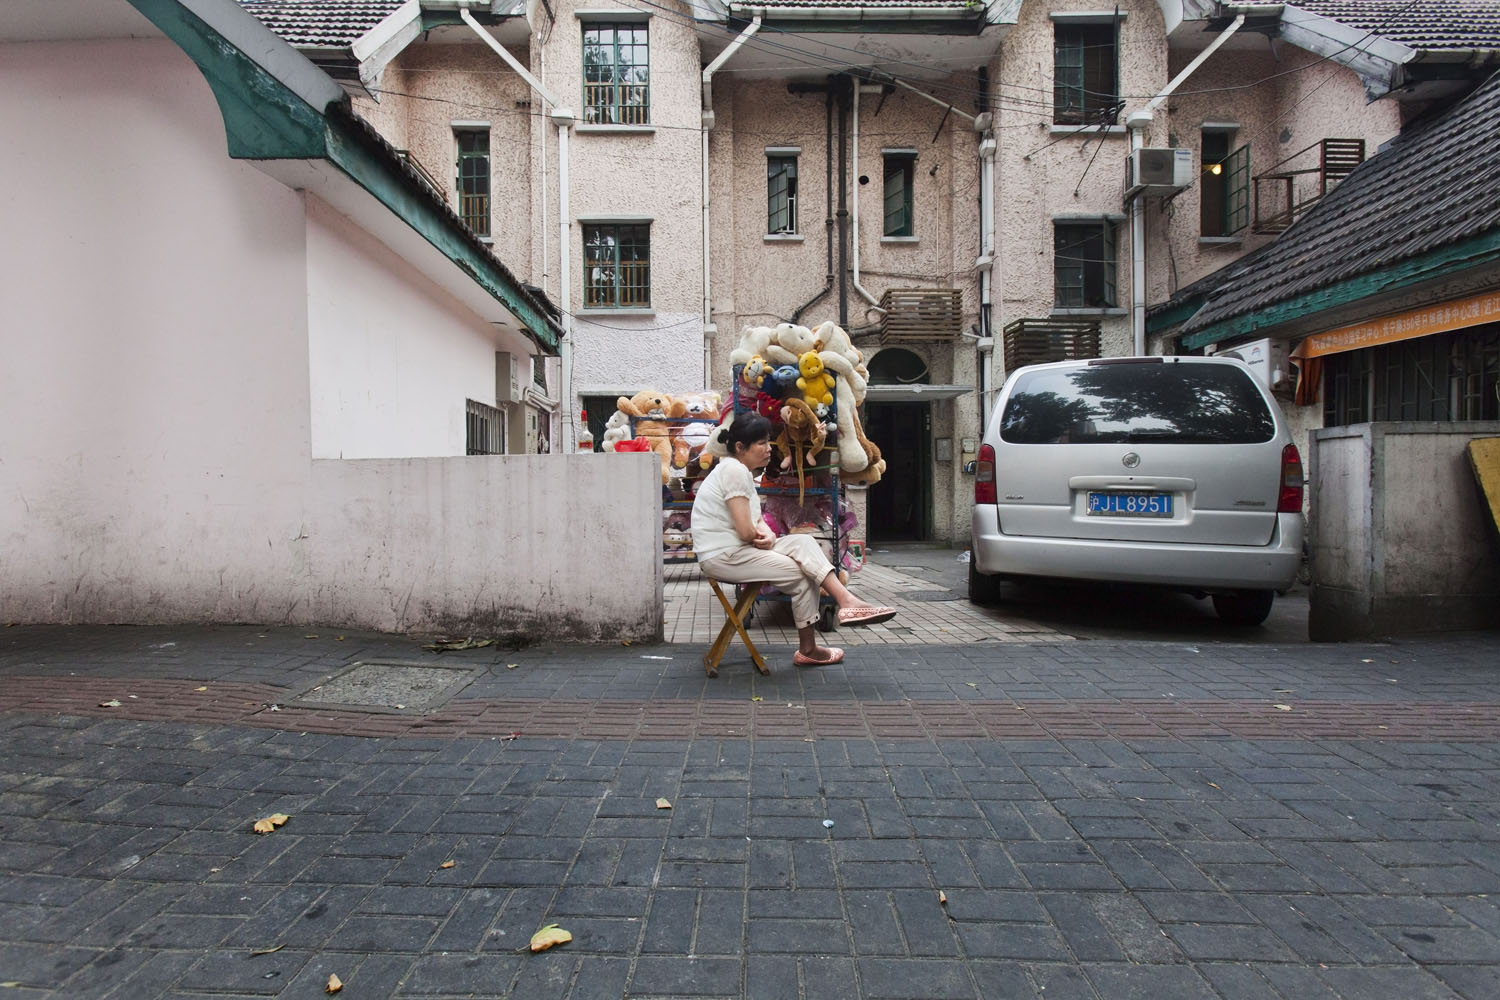 Woman sitting next to carts full of stuffed animals in Changning. Shanghai, China. 2015.